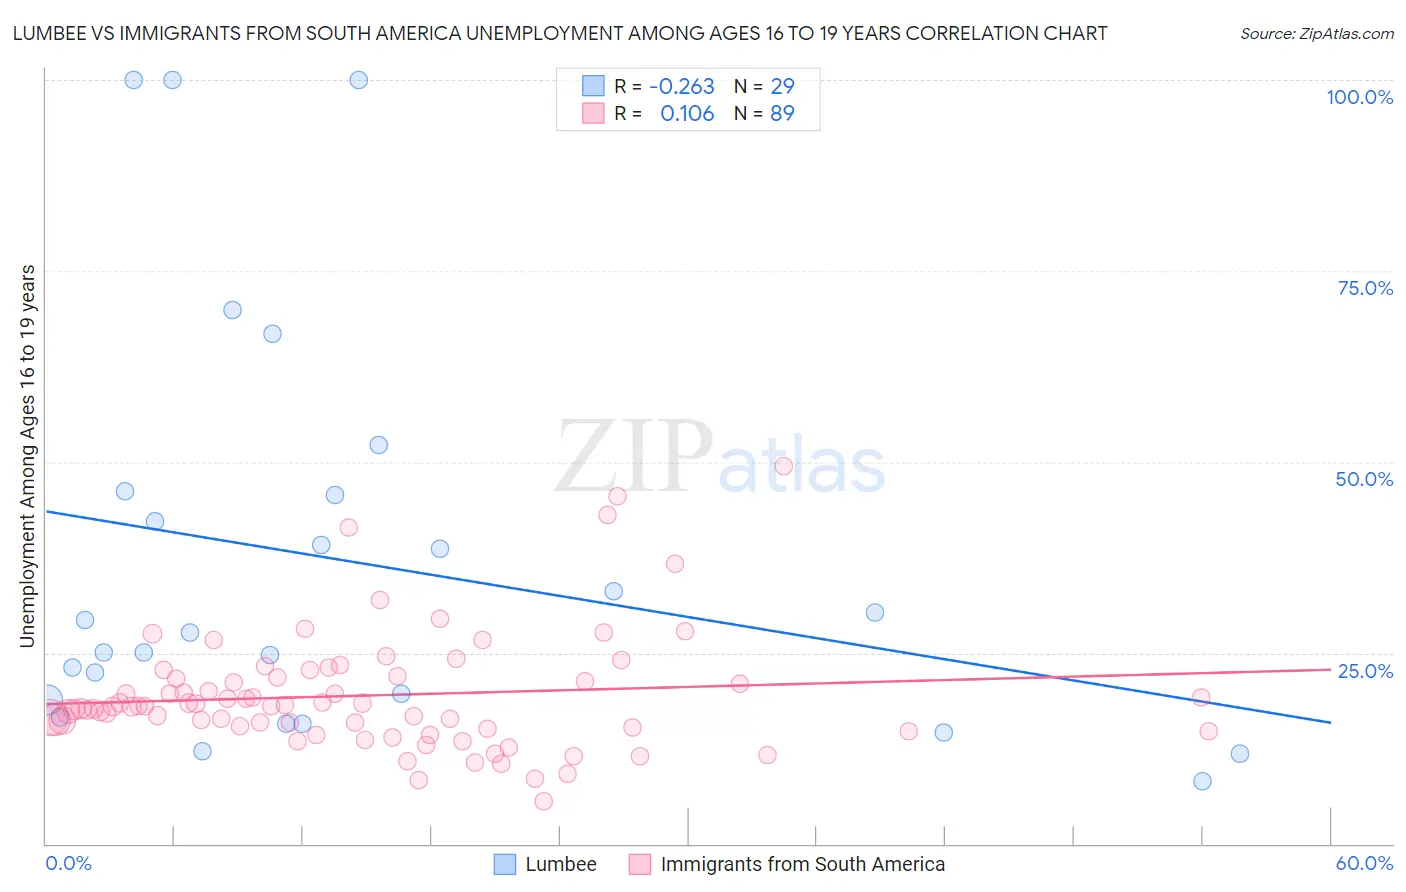 Lumbee vs Immigrants from South America Unemployment Among Ages 16 to 19 years